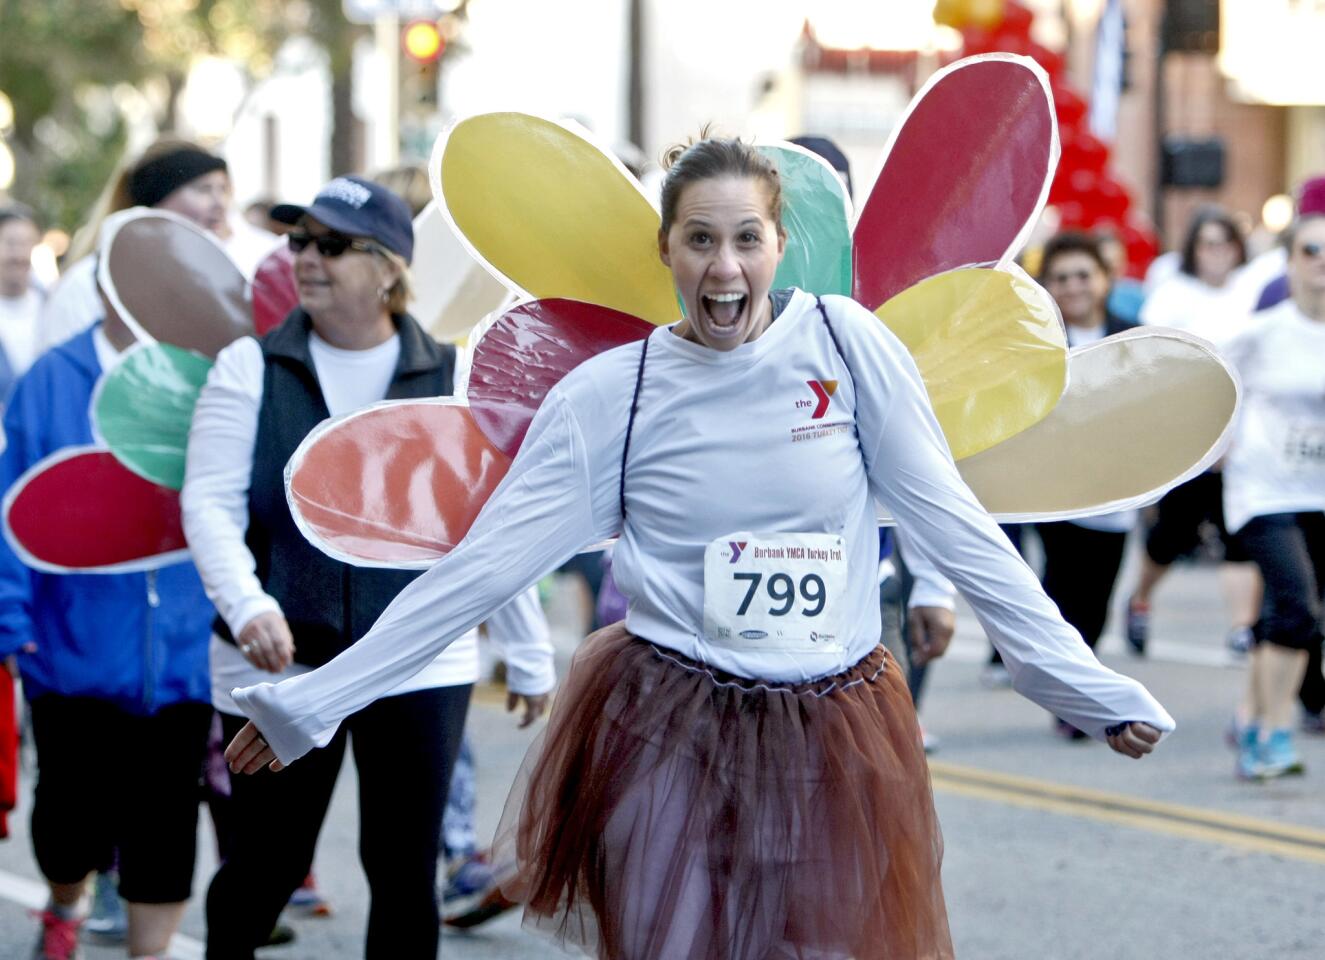 Wearing a turkey costume, Jill Pomfet of Sunland smiles as she starts the 2016 Burbank YMCA Turkey Trot on Thanksgiving Day in downtown Burbank on Thursday, Nov. 24, 2016. About 2,500 participants ran in the 10K, 5K and kids' run.